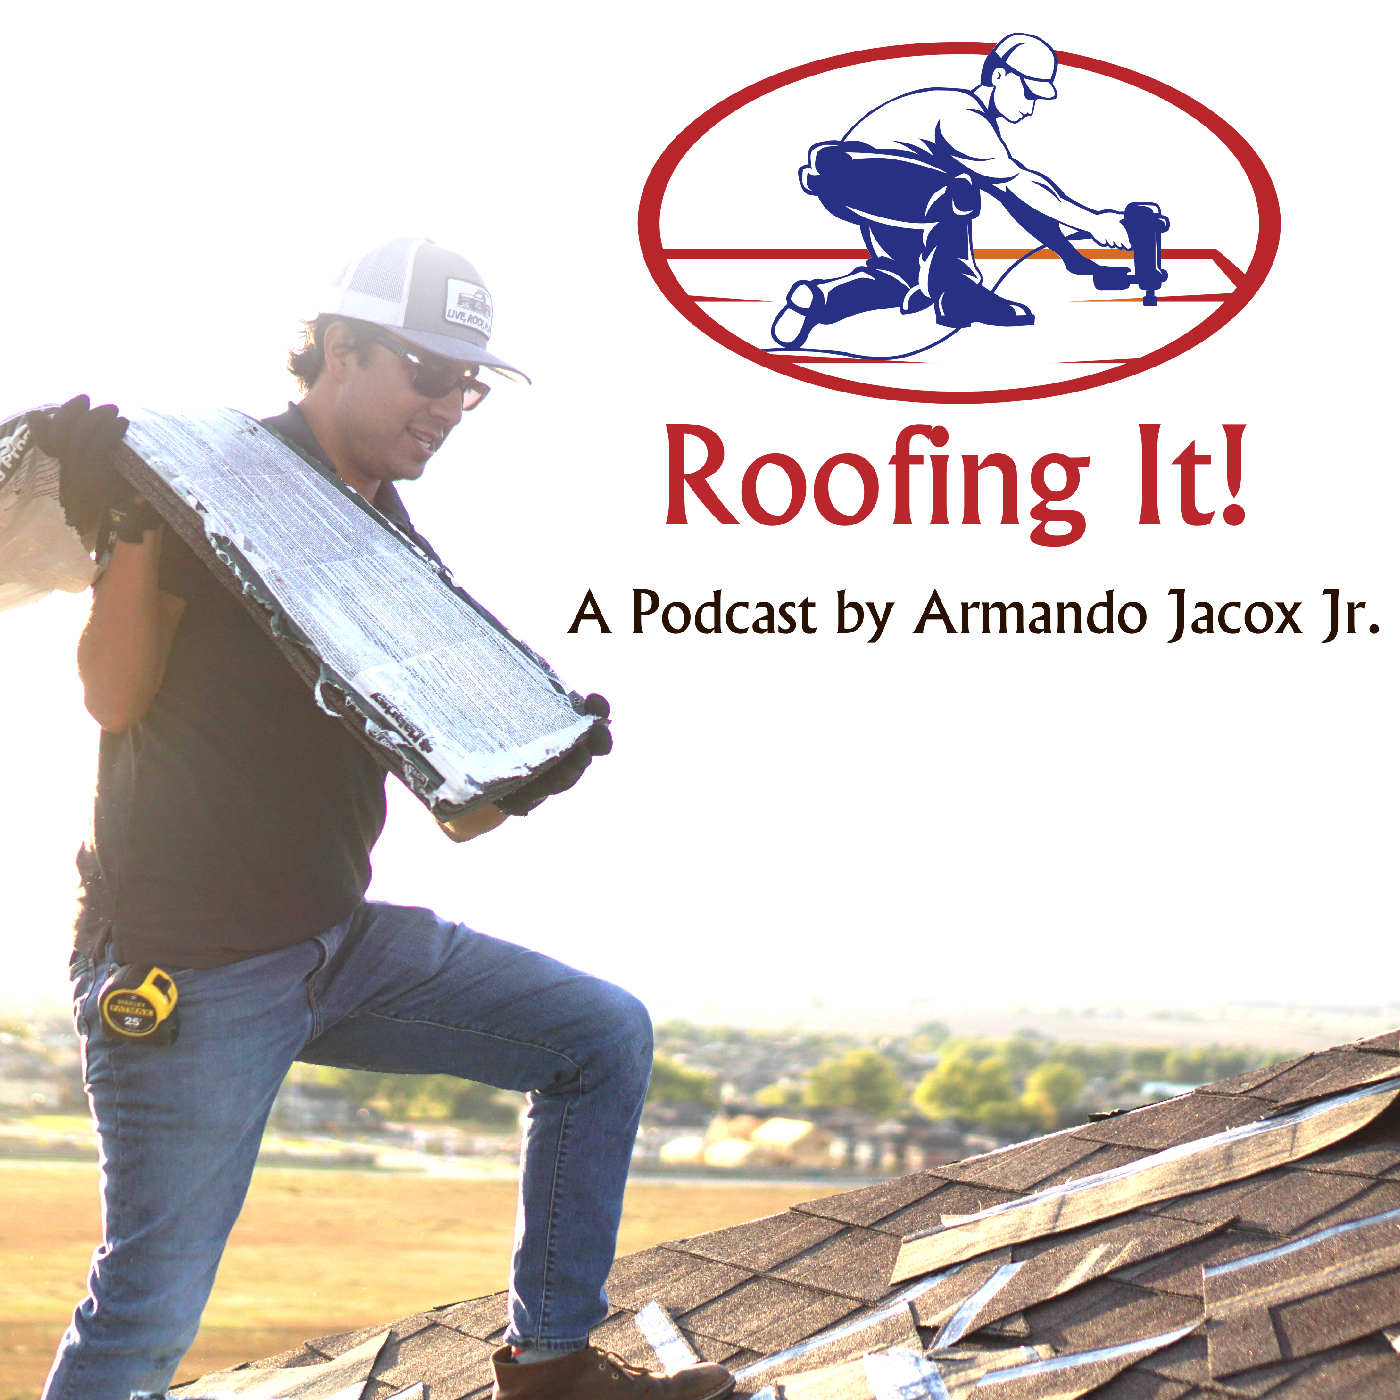 Roofing It! A Podcast by Armando Jacox Jr.